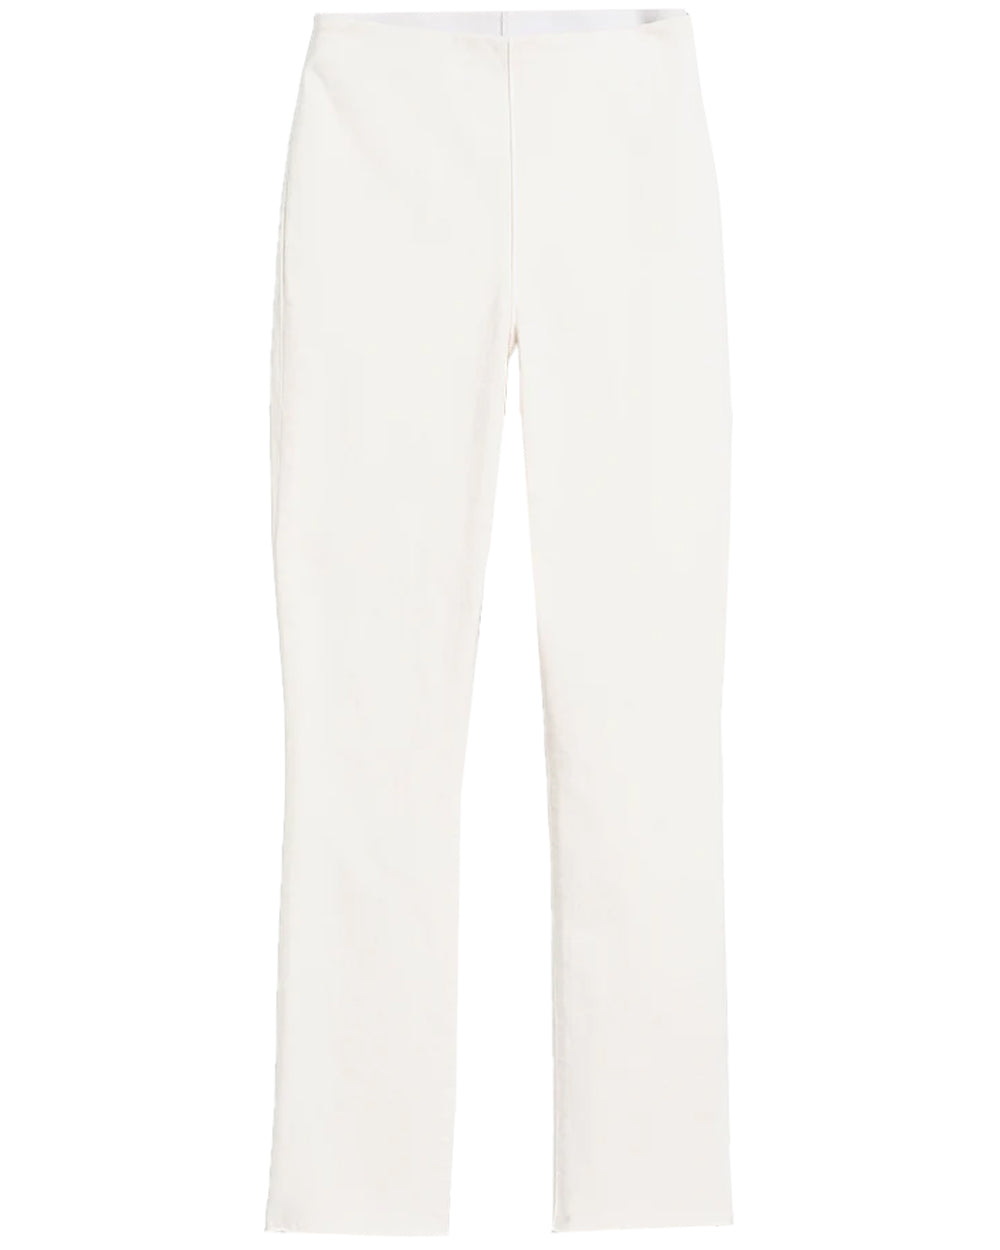 Derry Slim Straight Pant in Antique White